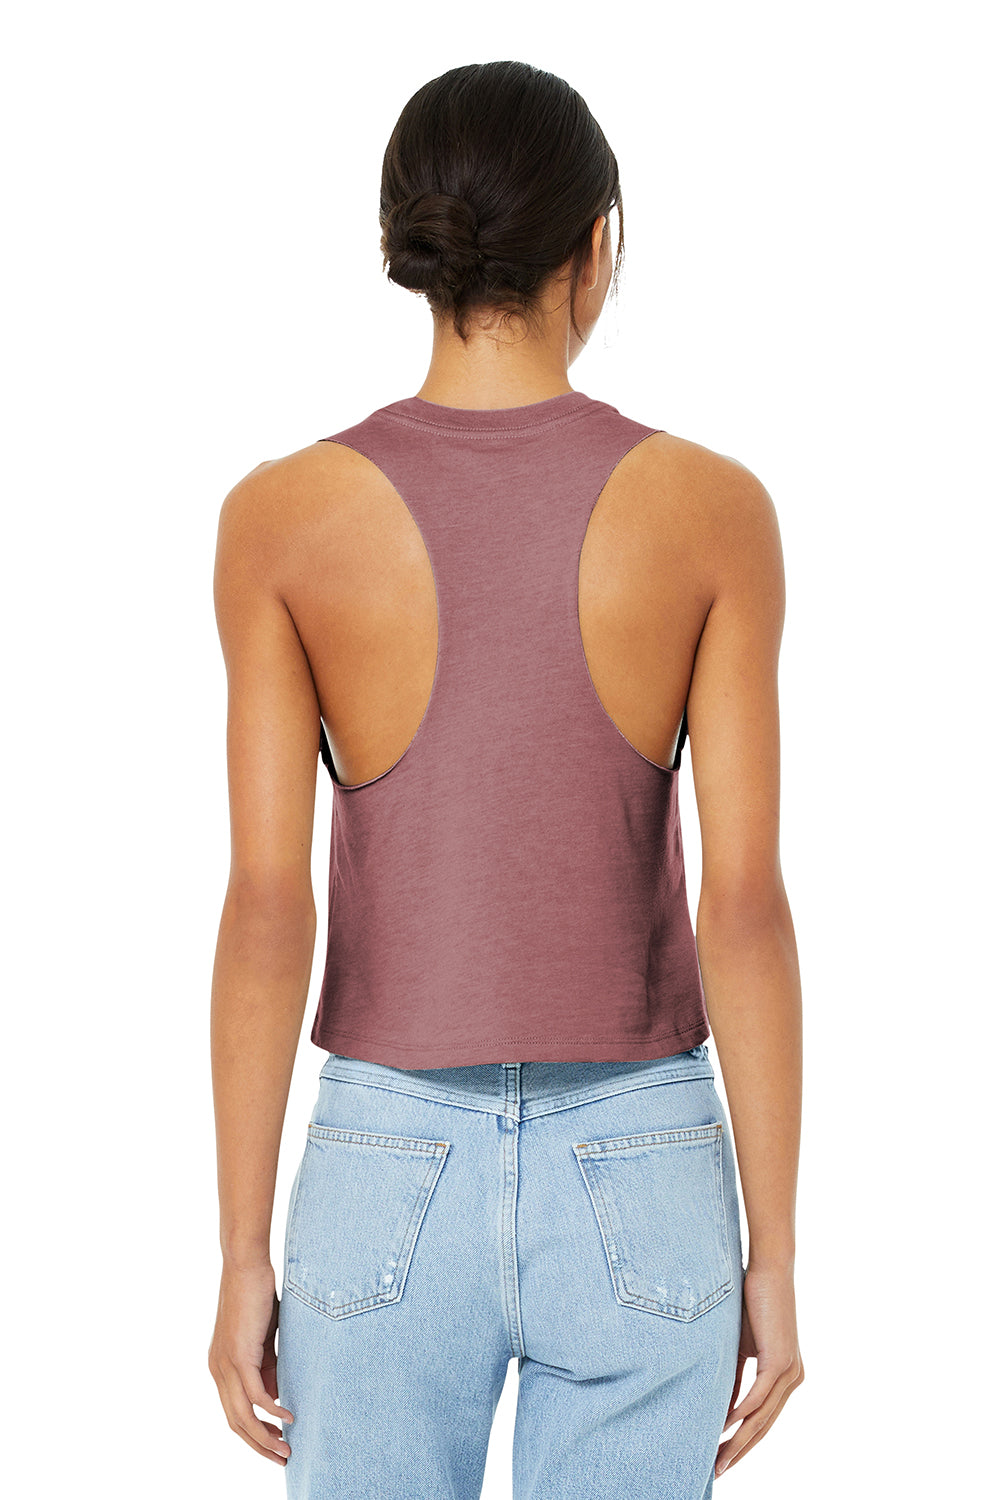 Bella + Canvas BC6682/6682 Womens Cropped Tank Top Heather Mauve Model Back